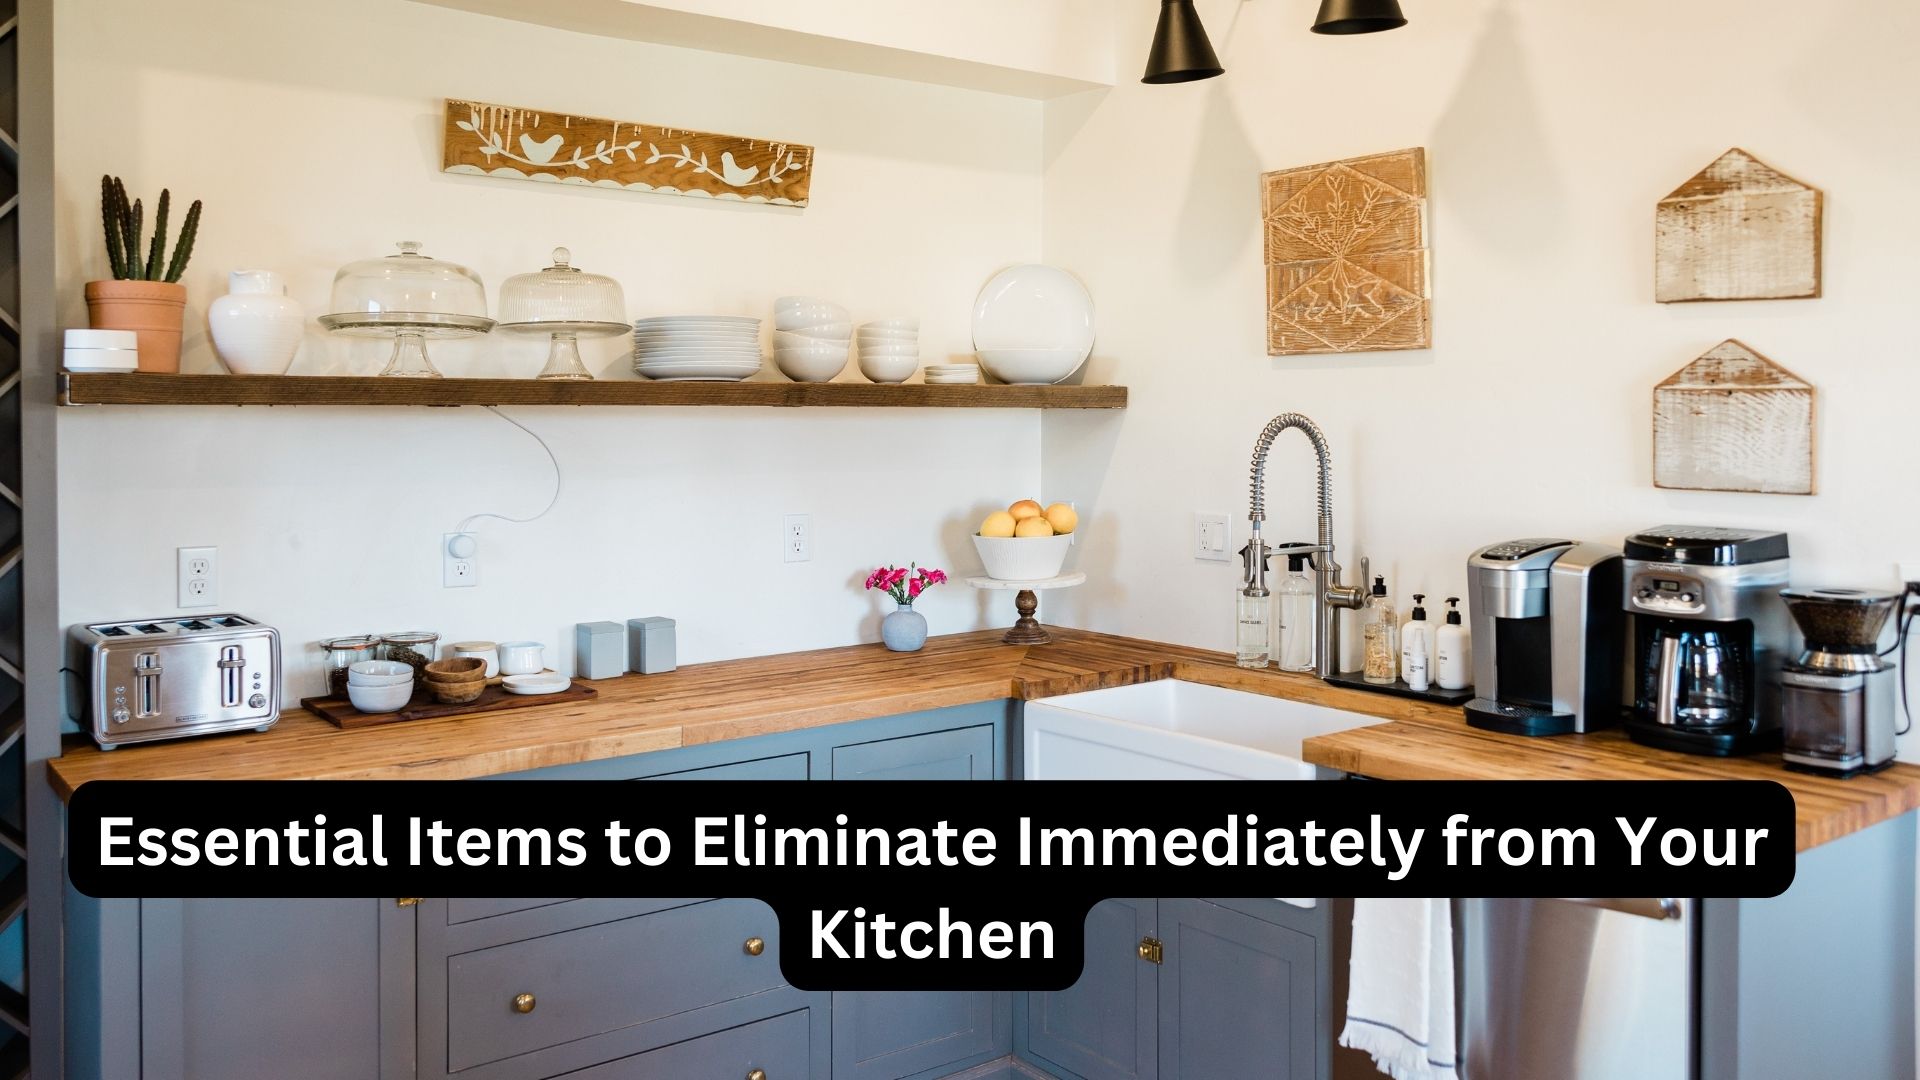 Essential Items to Eliminate Immediately from Your Kitchen